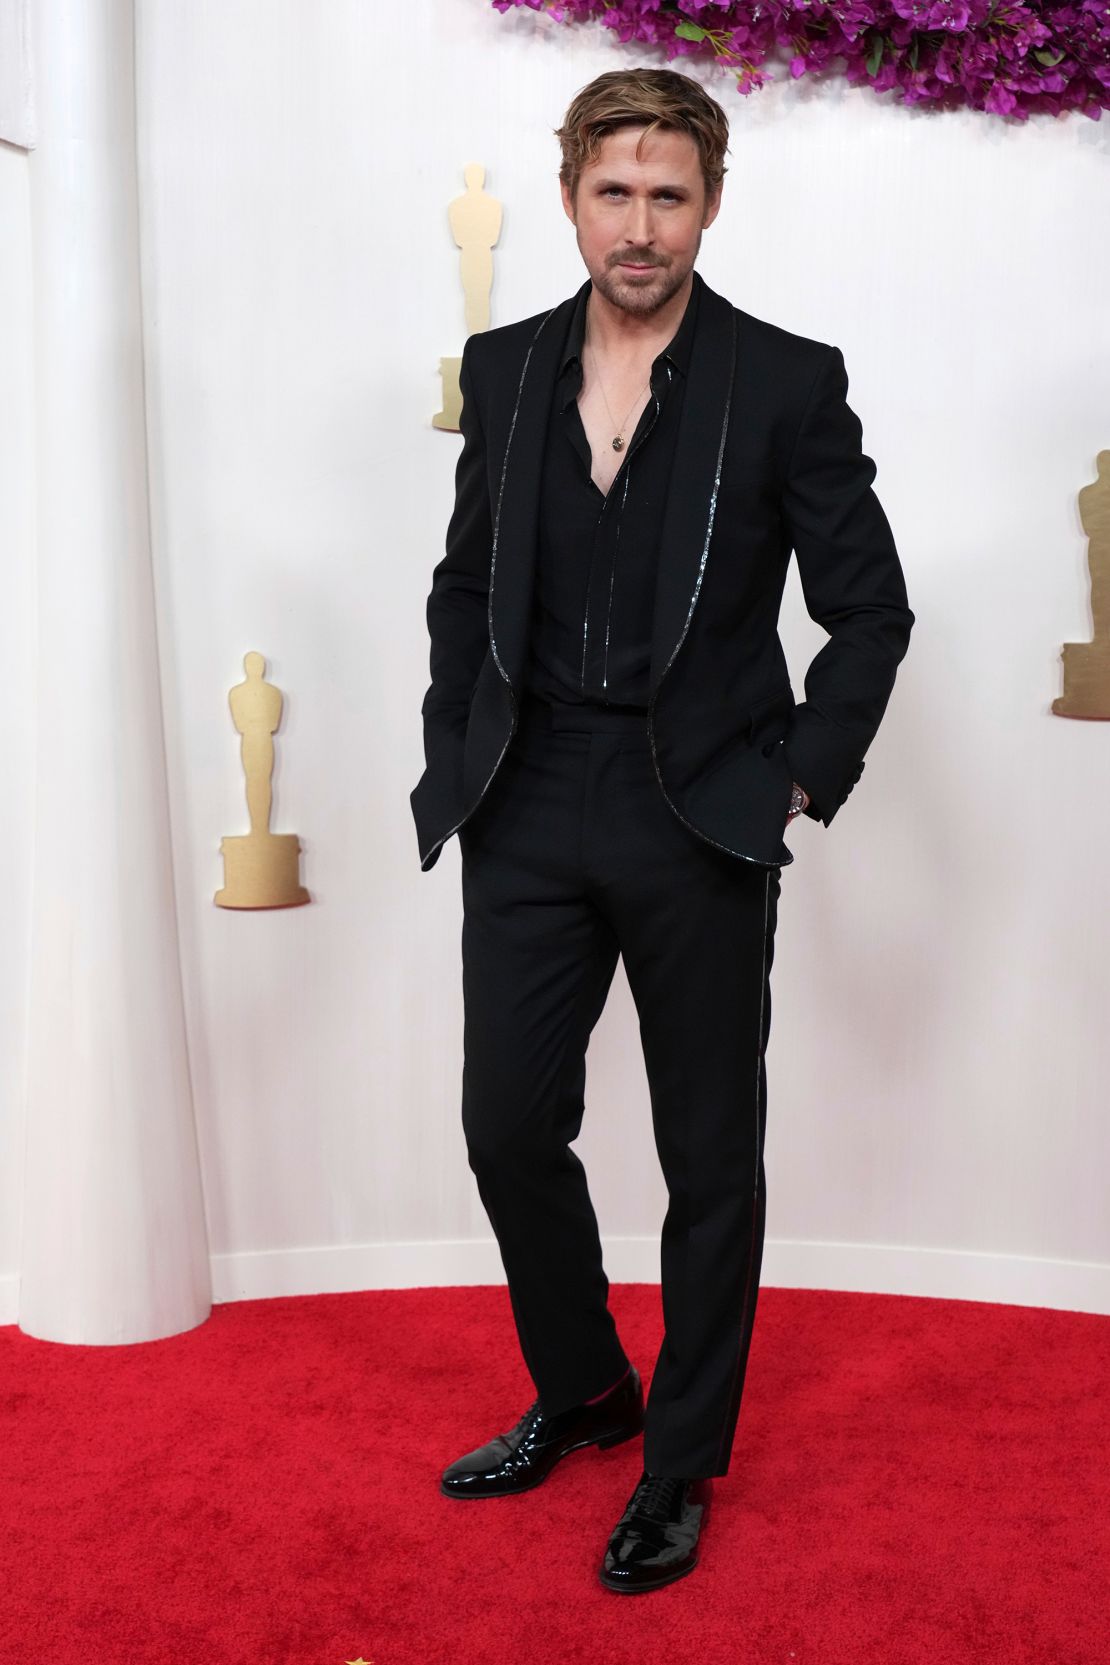 Ryan Gosling, nominated as Best Supporting Actor for his performance in “Barbie,” arrived in a custom Gucci suit lined with silver sequins.